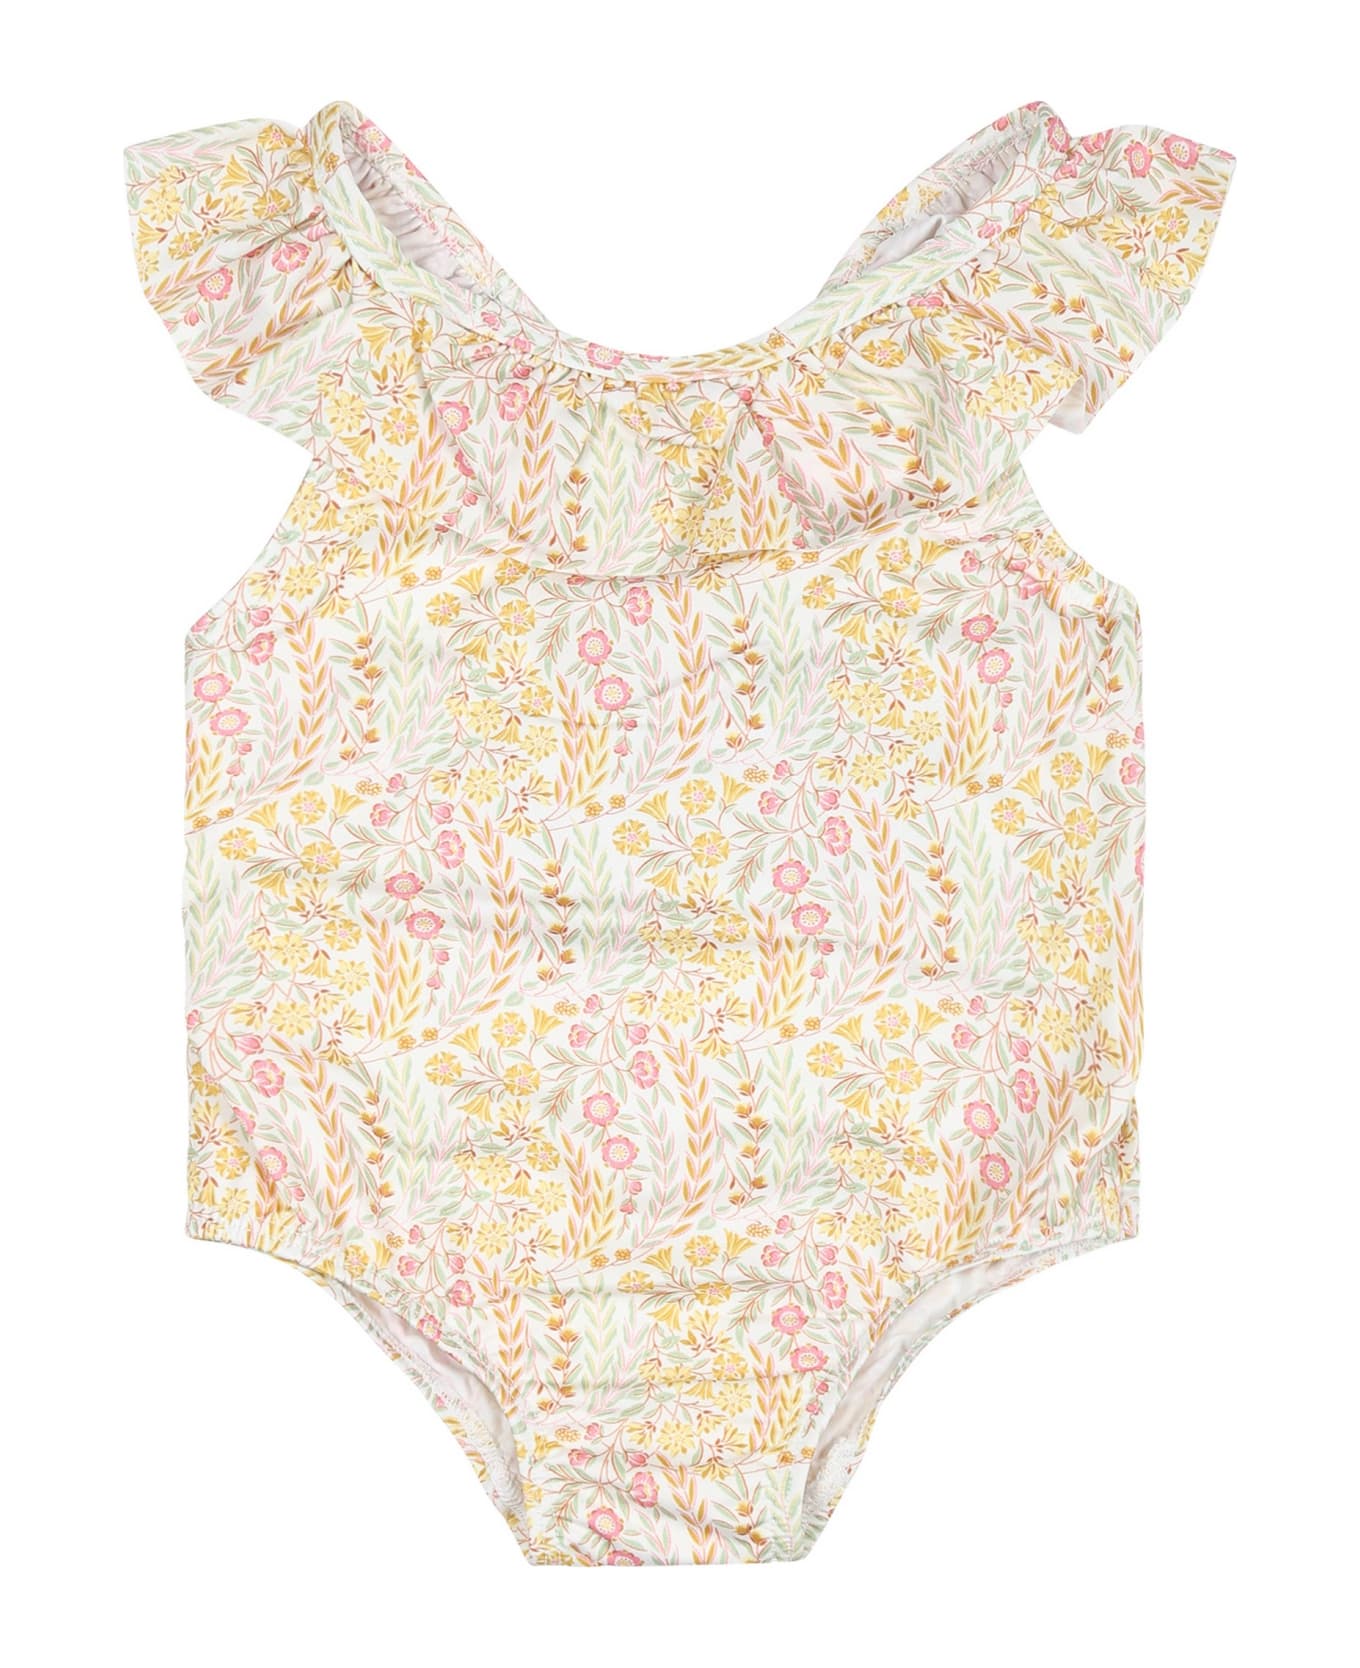 Tartine et Chocolat Ivory One-piece Swimsuit For Baby Girl With Liberty Fabric - Ivory 水着